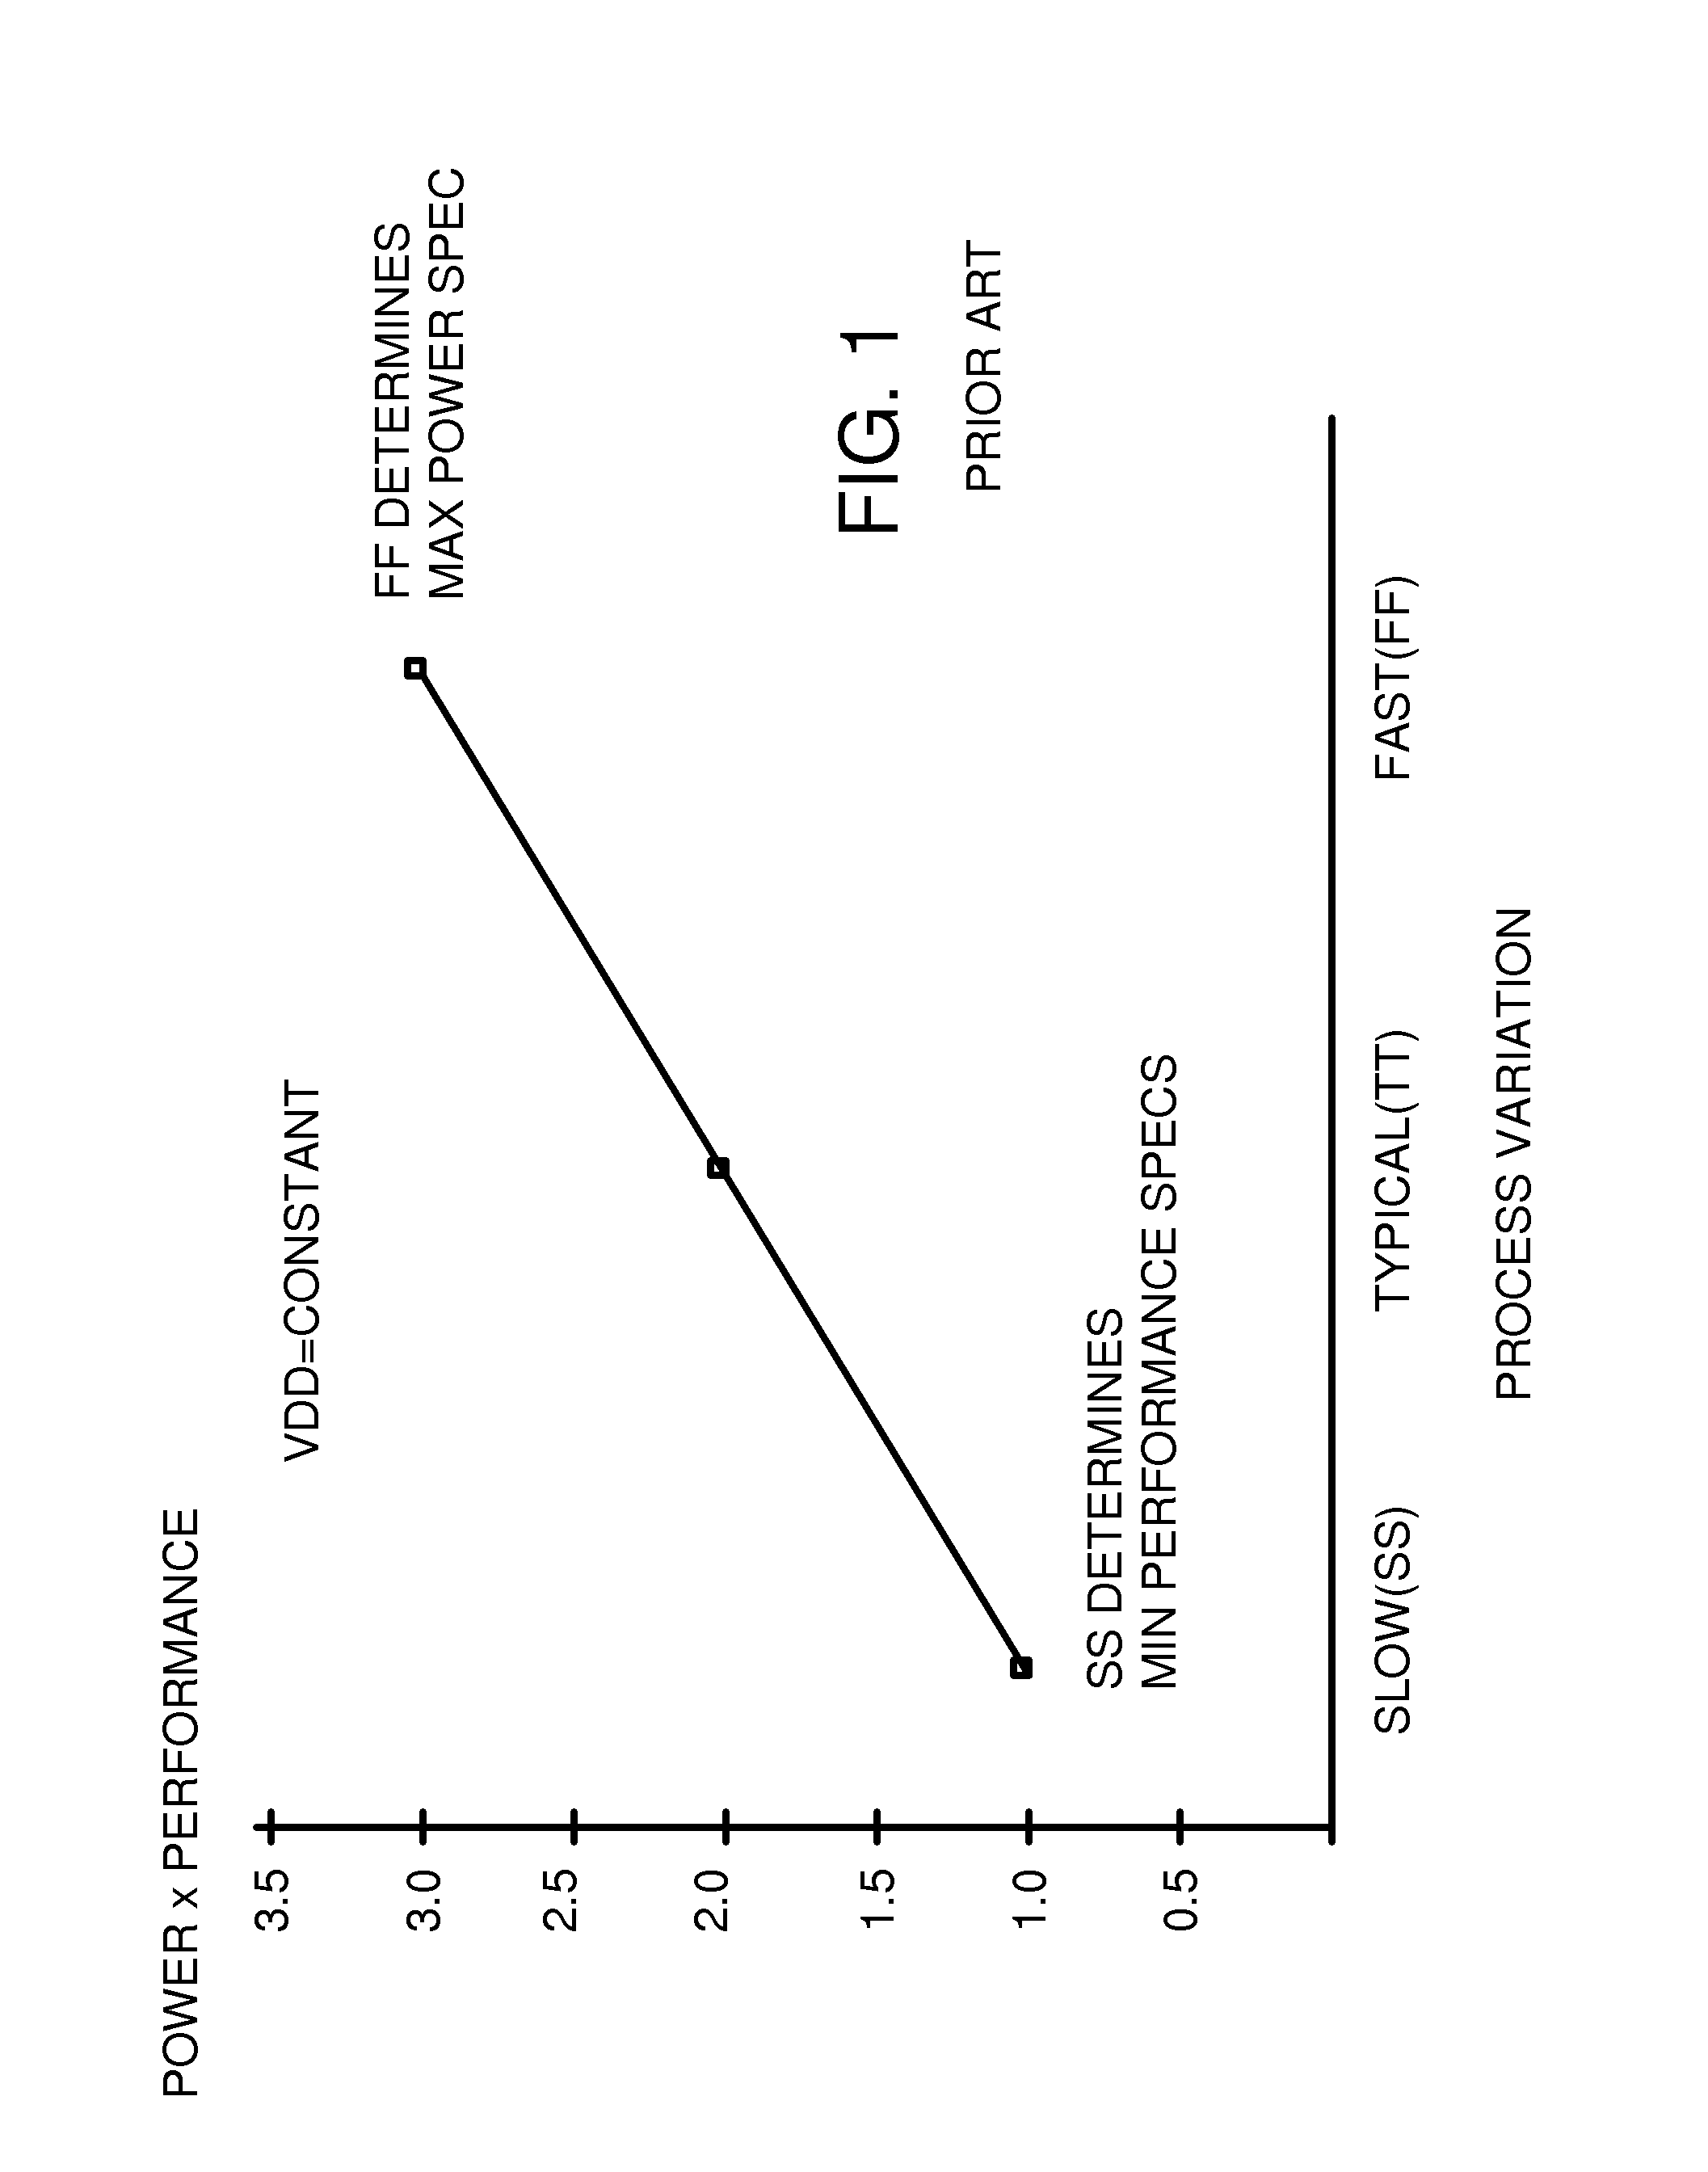 Circuitry and method for measuring negative bias temperature instability (NBTI) and hot carrier injection (HCI) aging effects using edge sensitive sampling